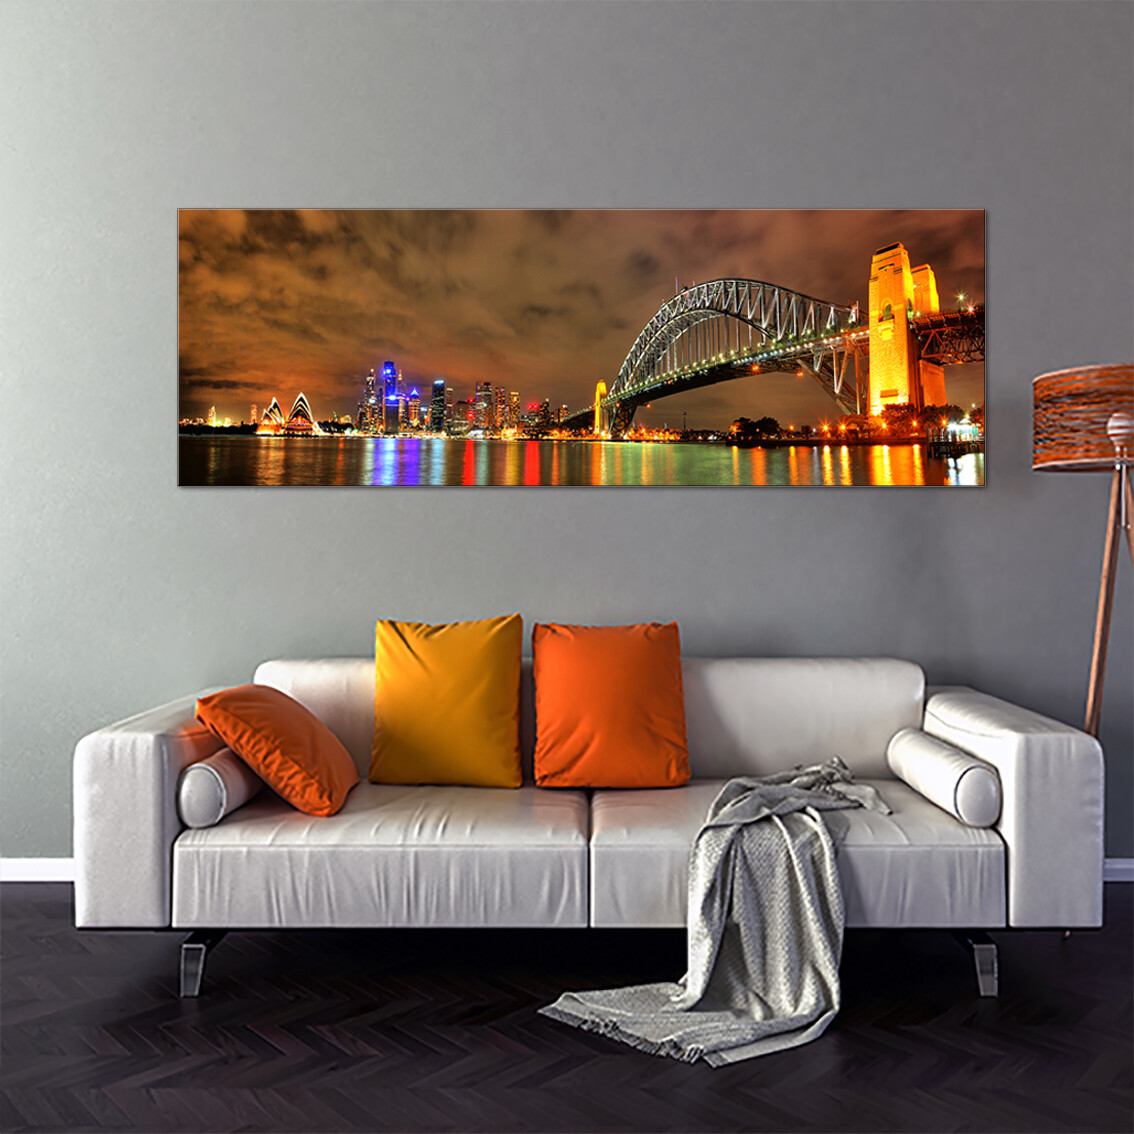 Sydney Harbour - Modern Luxury Wall art Printed on Acrylic Glass - Frameless and Ready to Hang